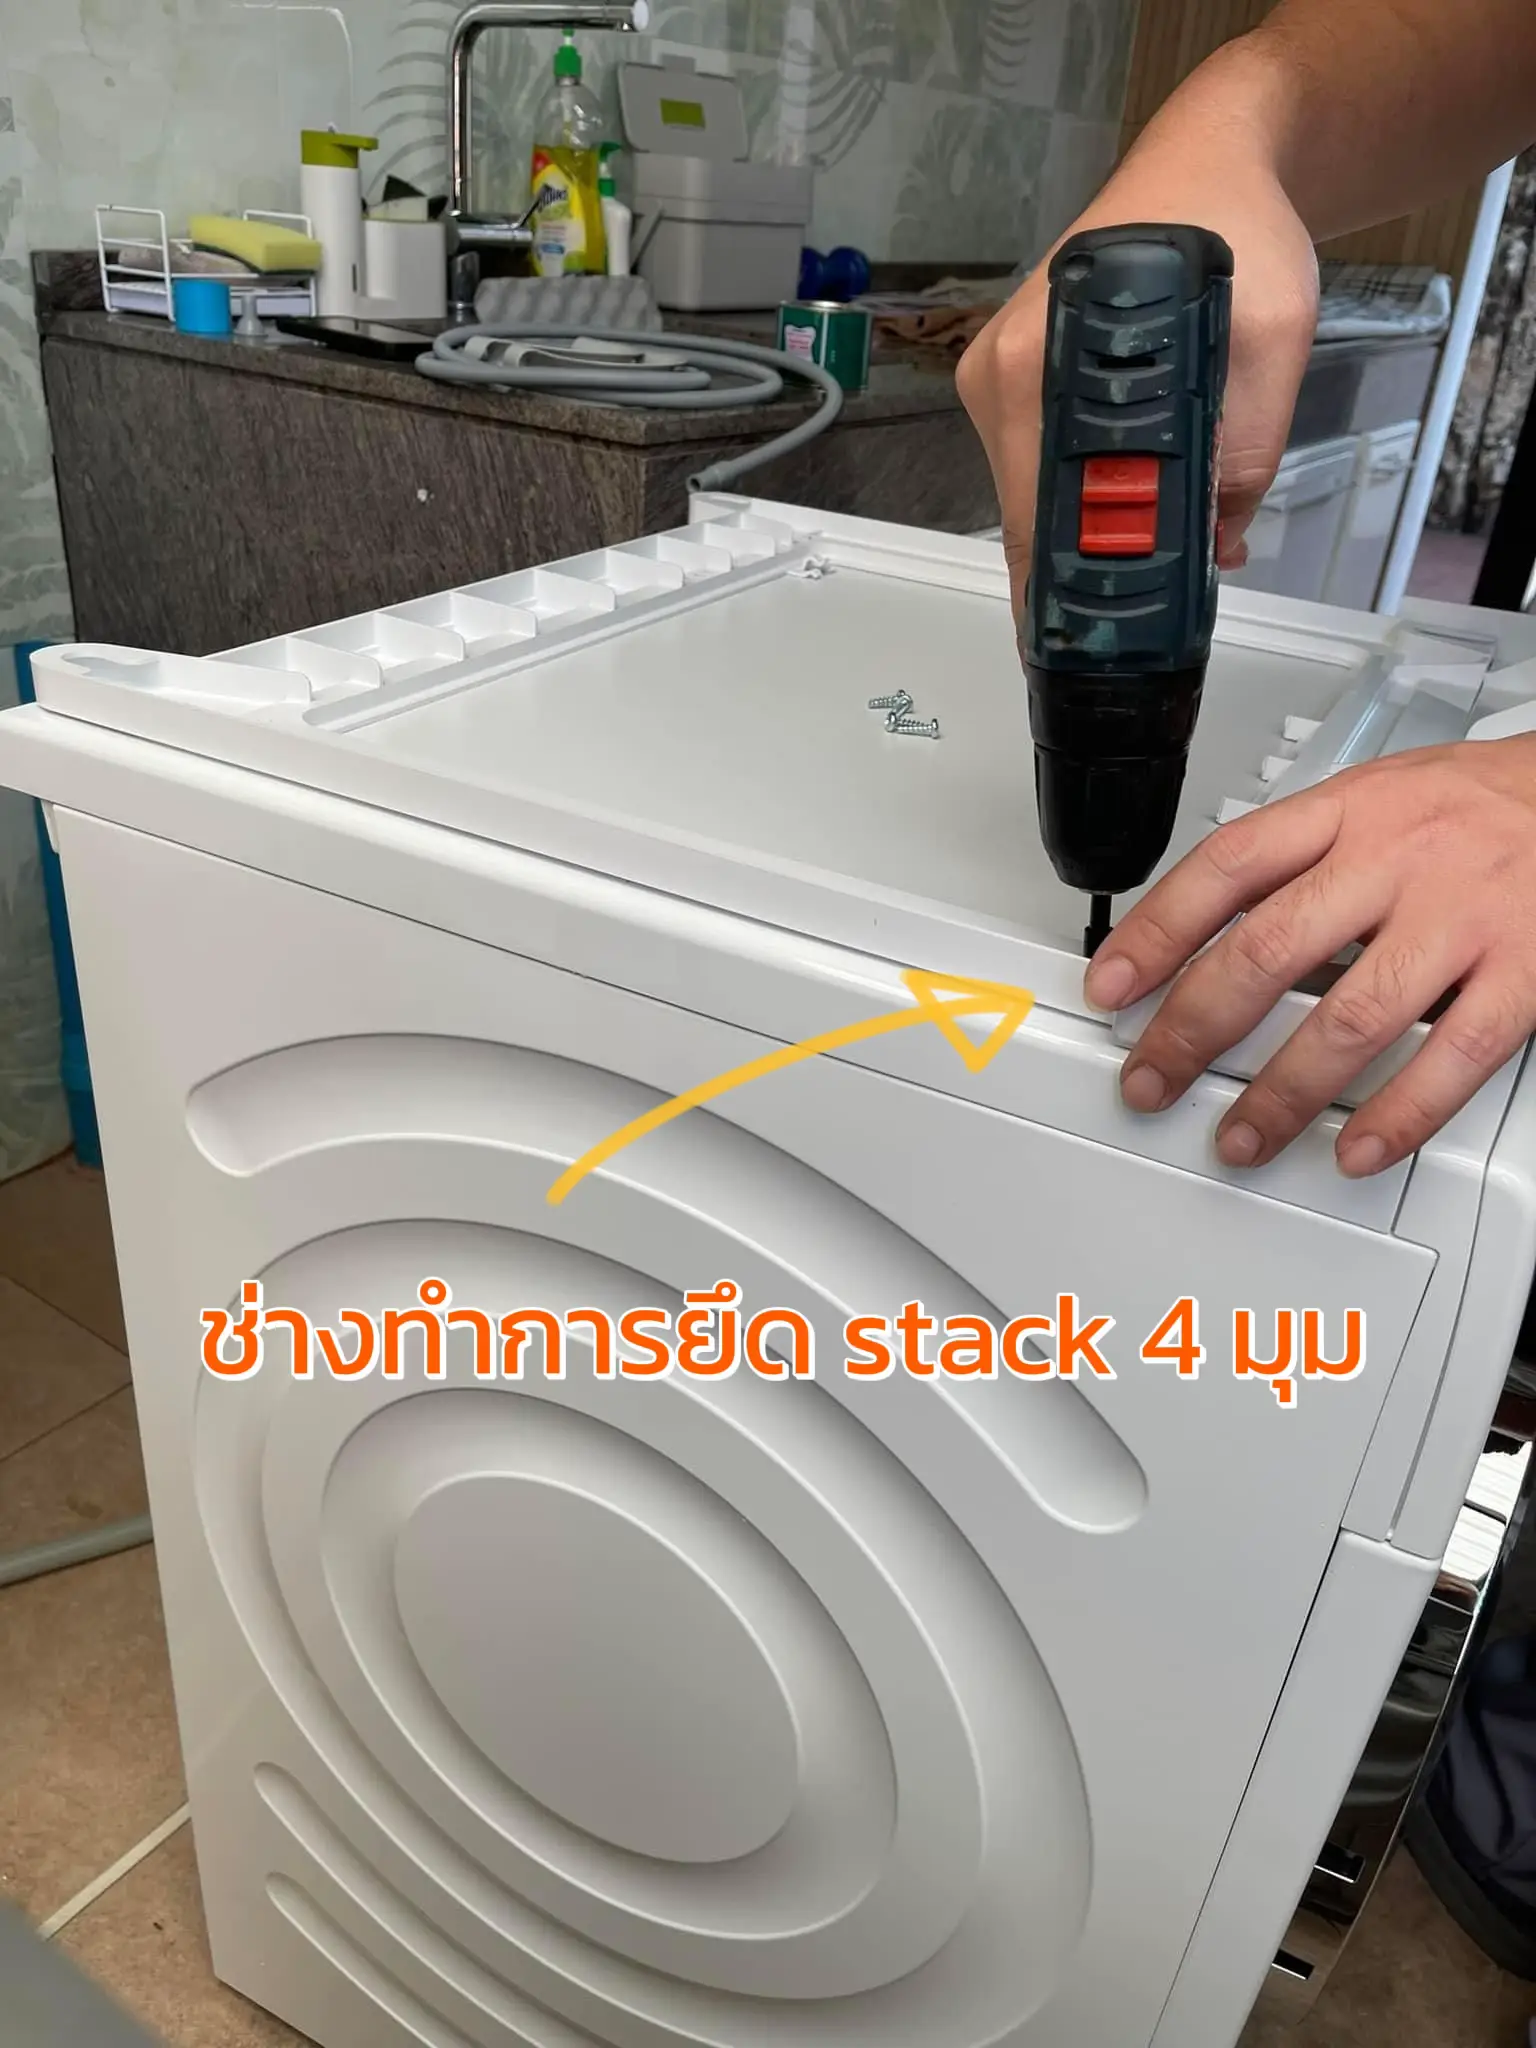  Morus Portable Dryer, Compact Laundry Dryer for